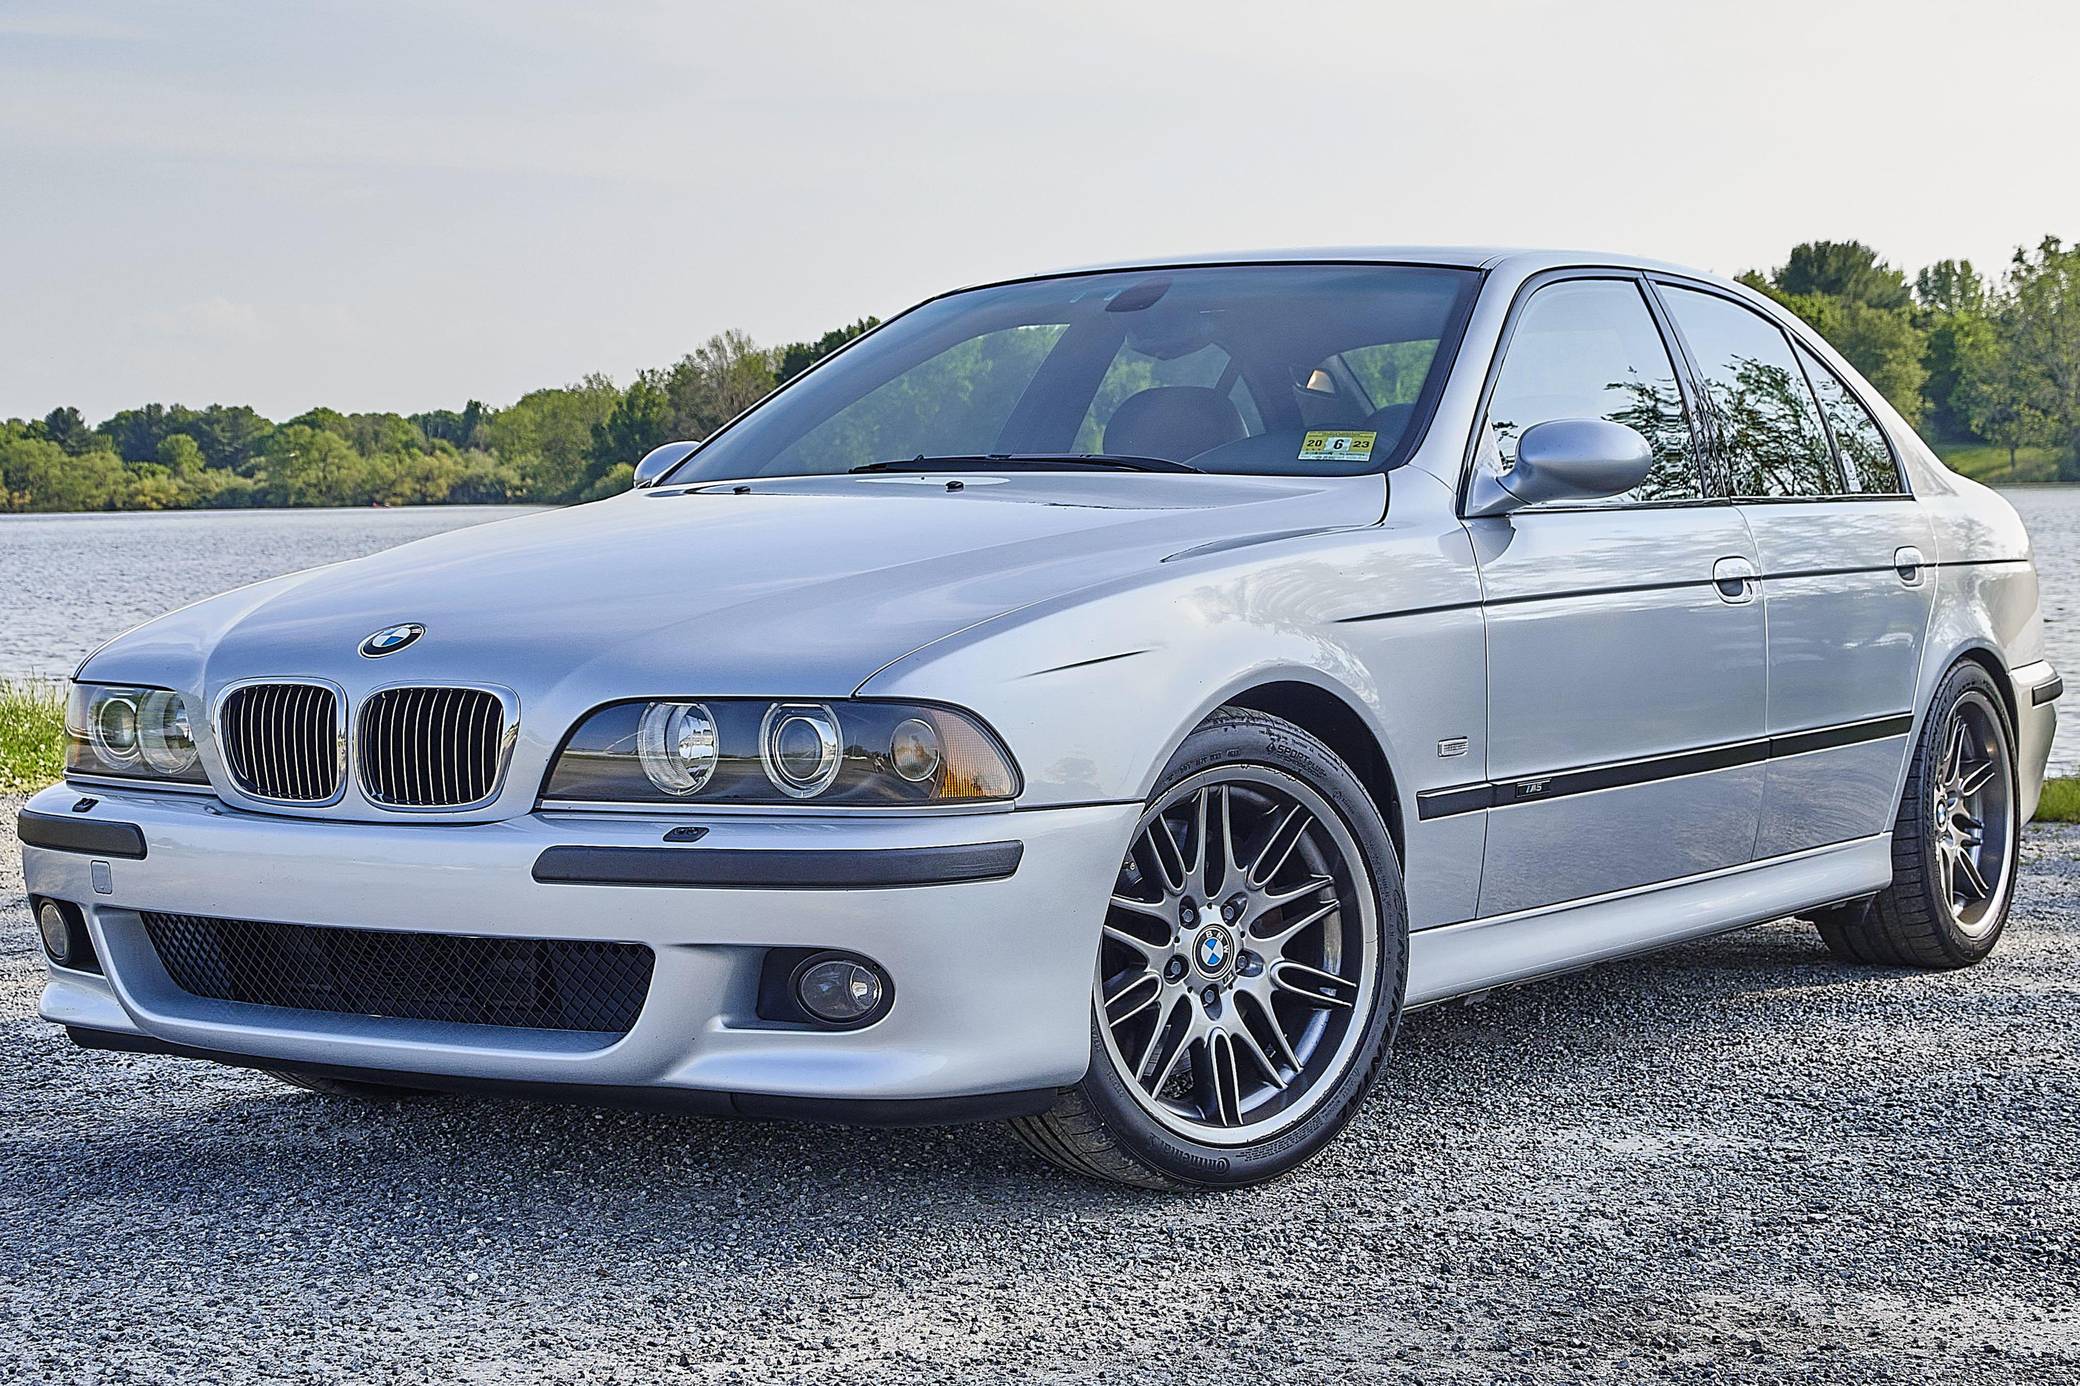 Find of the Week: 2002 BMW M5